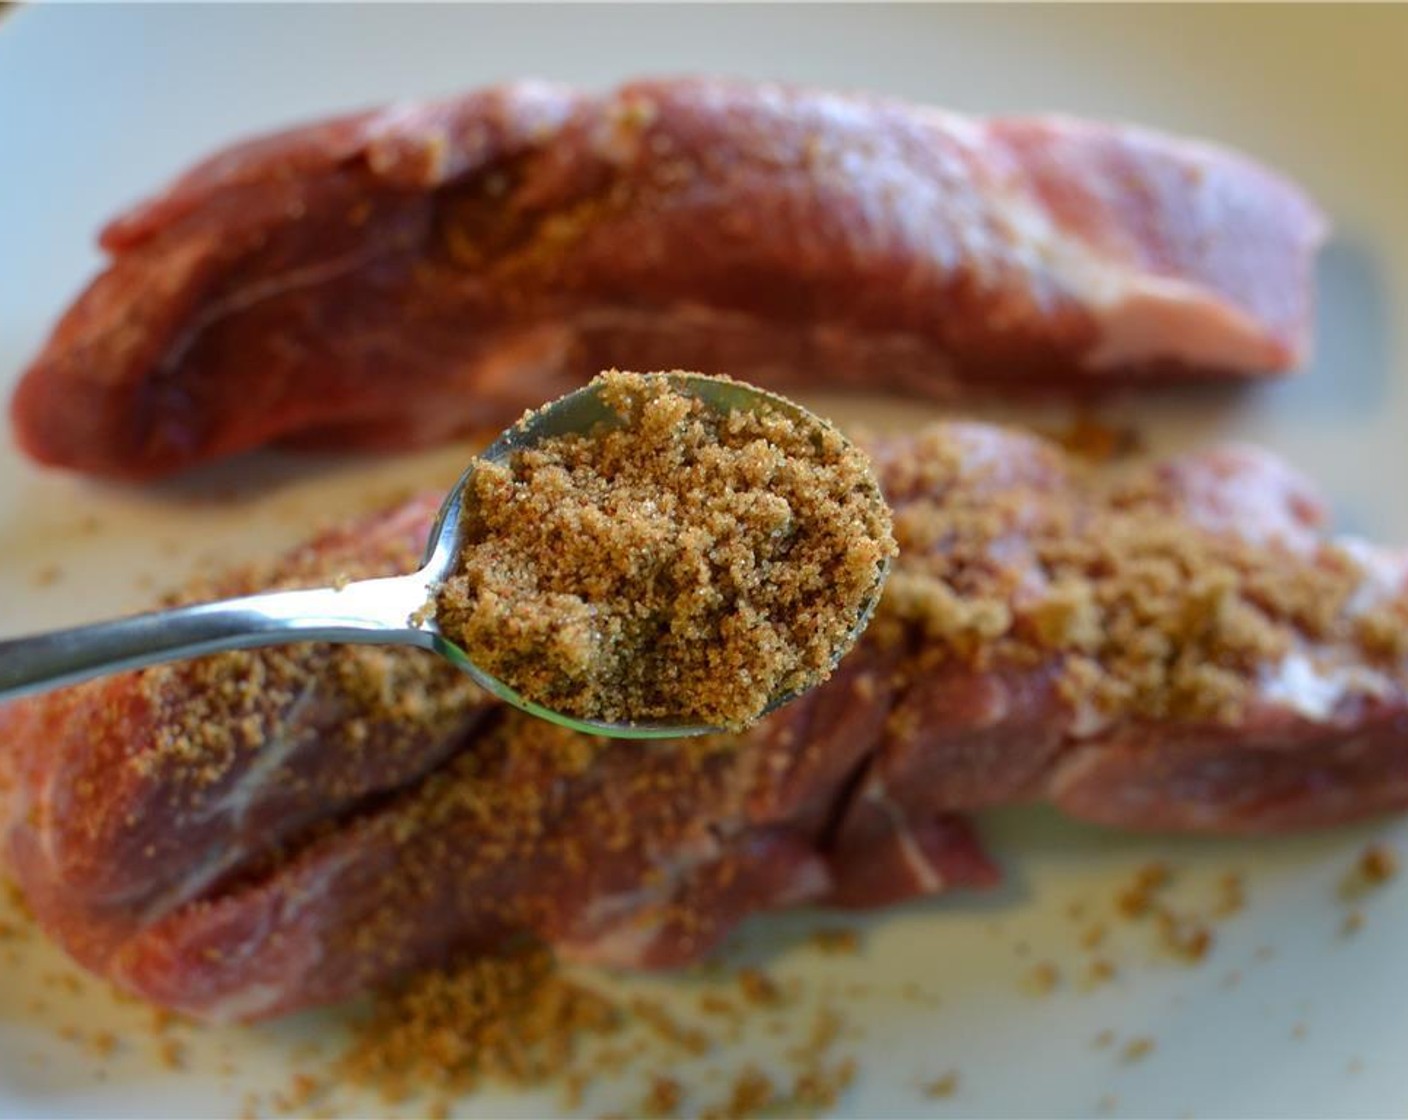 step 3 Spoon over half the dry rub onto the Boneless Pork Ribs (1.5 lb). Make sure you rub it on all sides and rub it into the meat well. Save the other half of the rub for later.